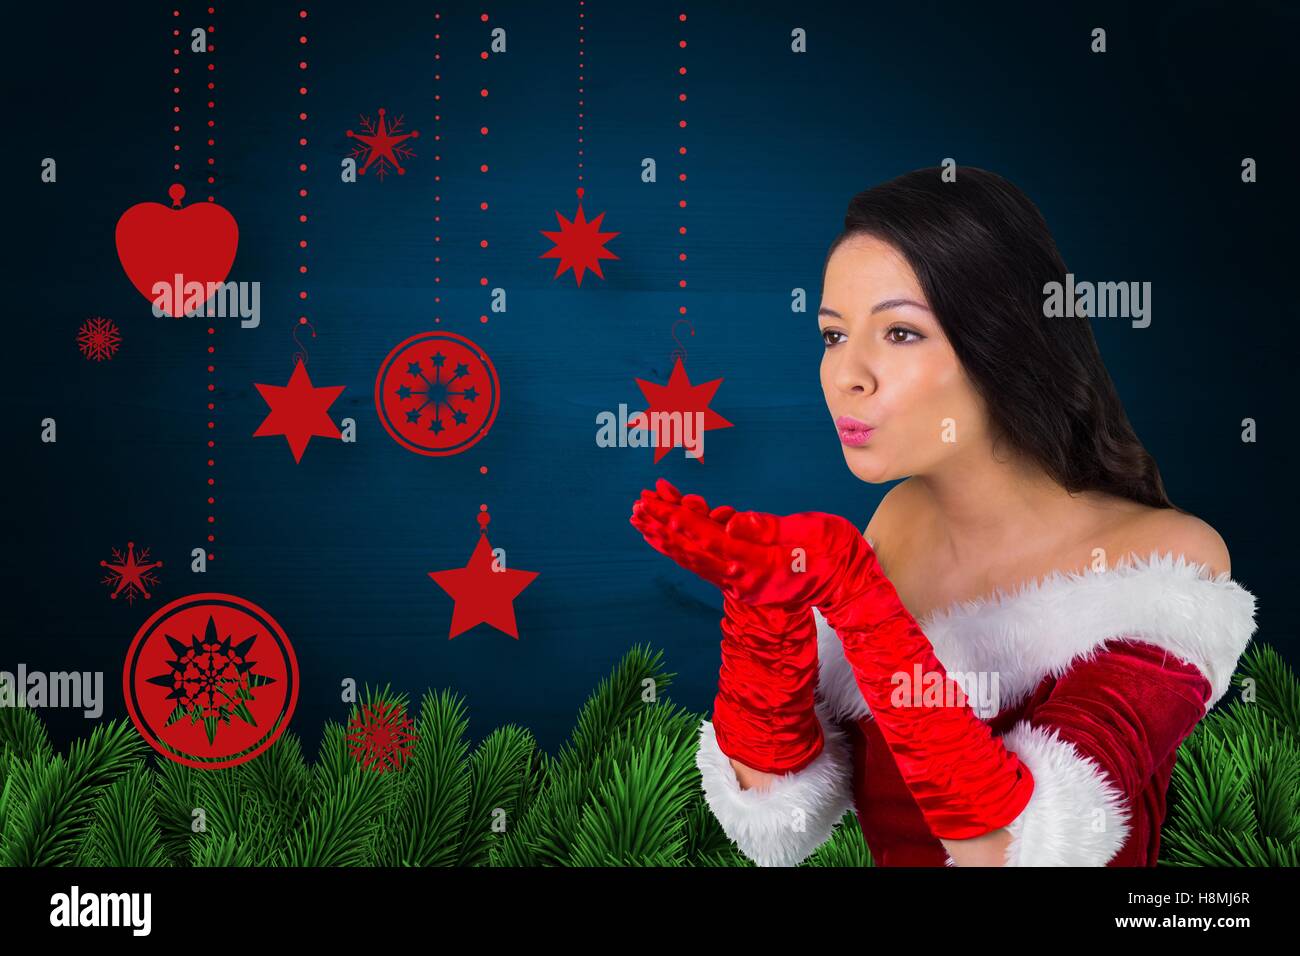 Woman in santa costume blowing a kiss against christmas background Stock Photo